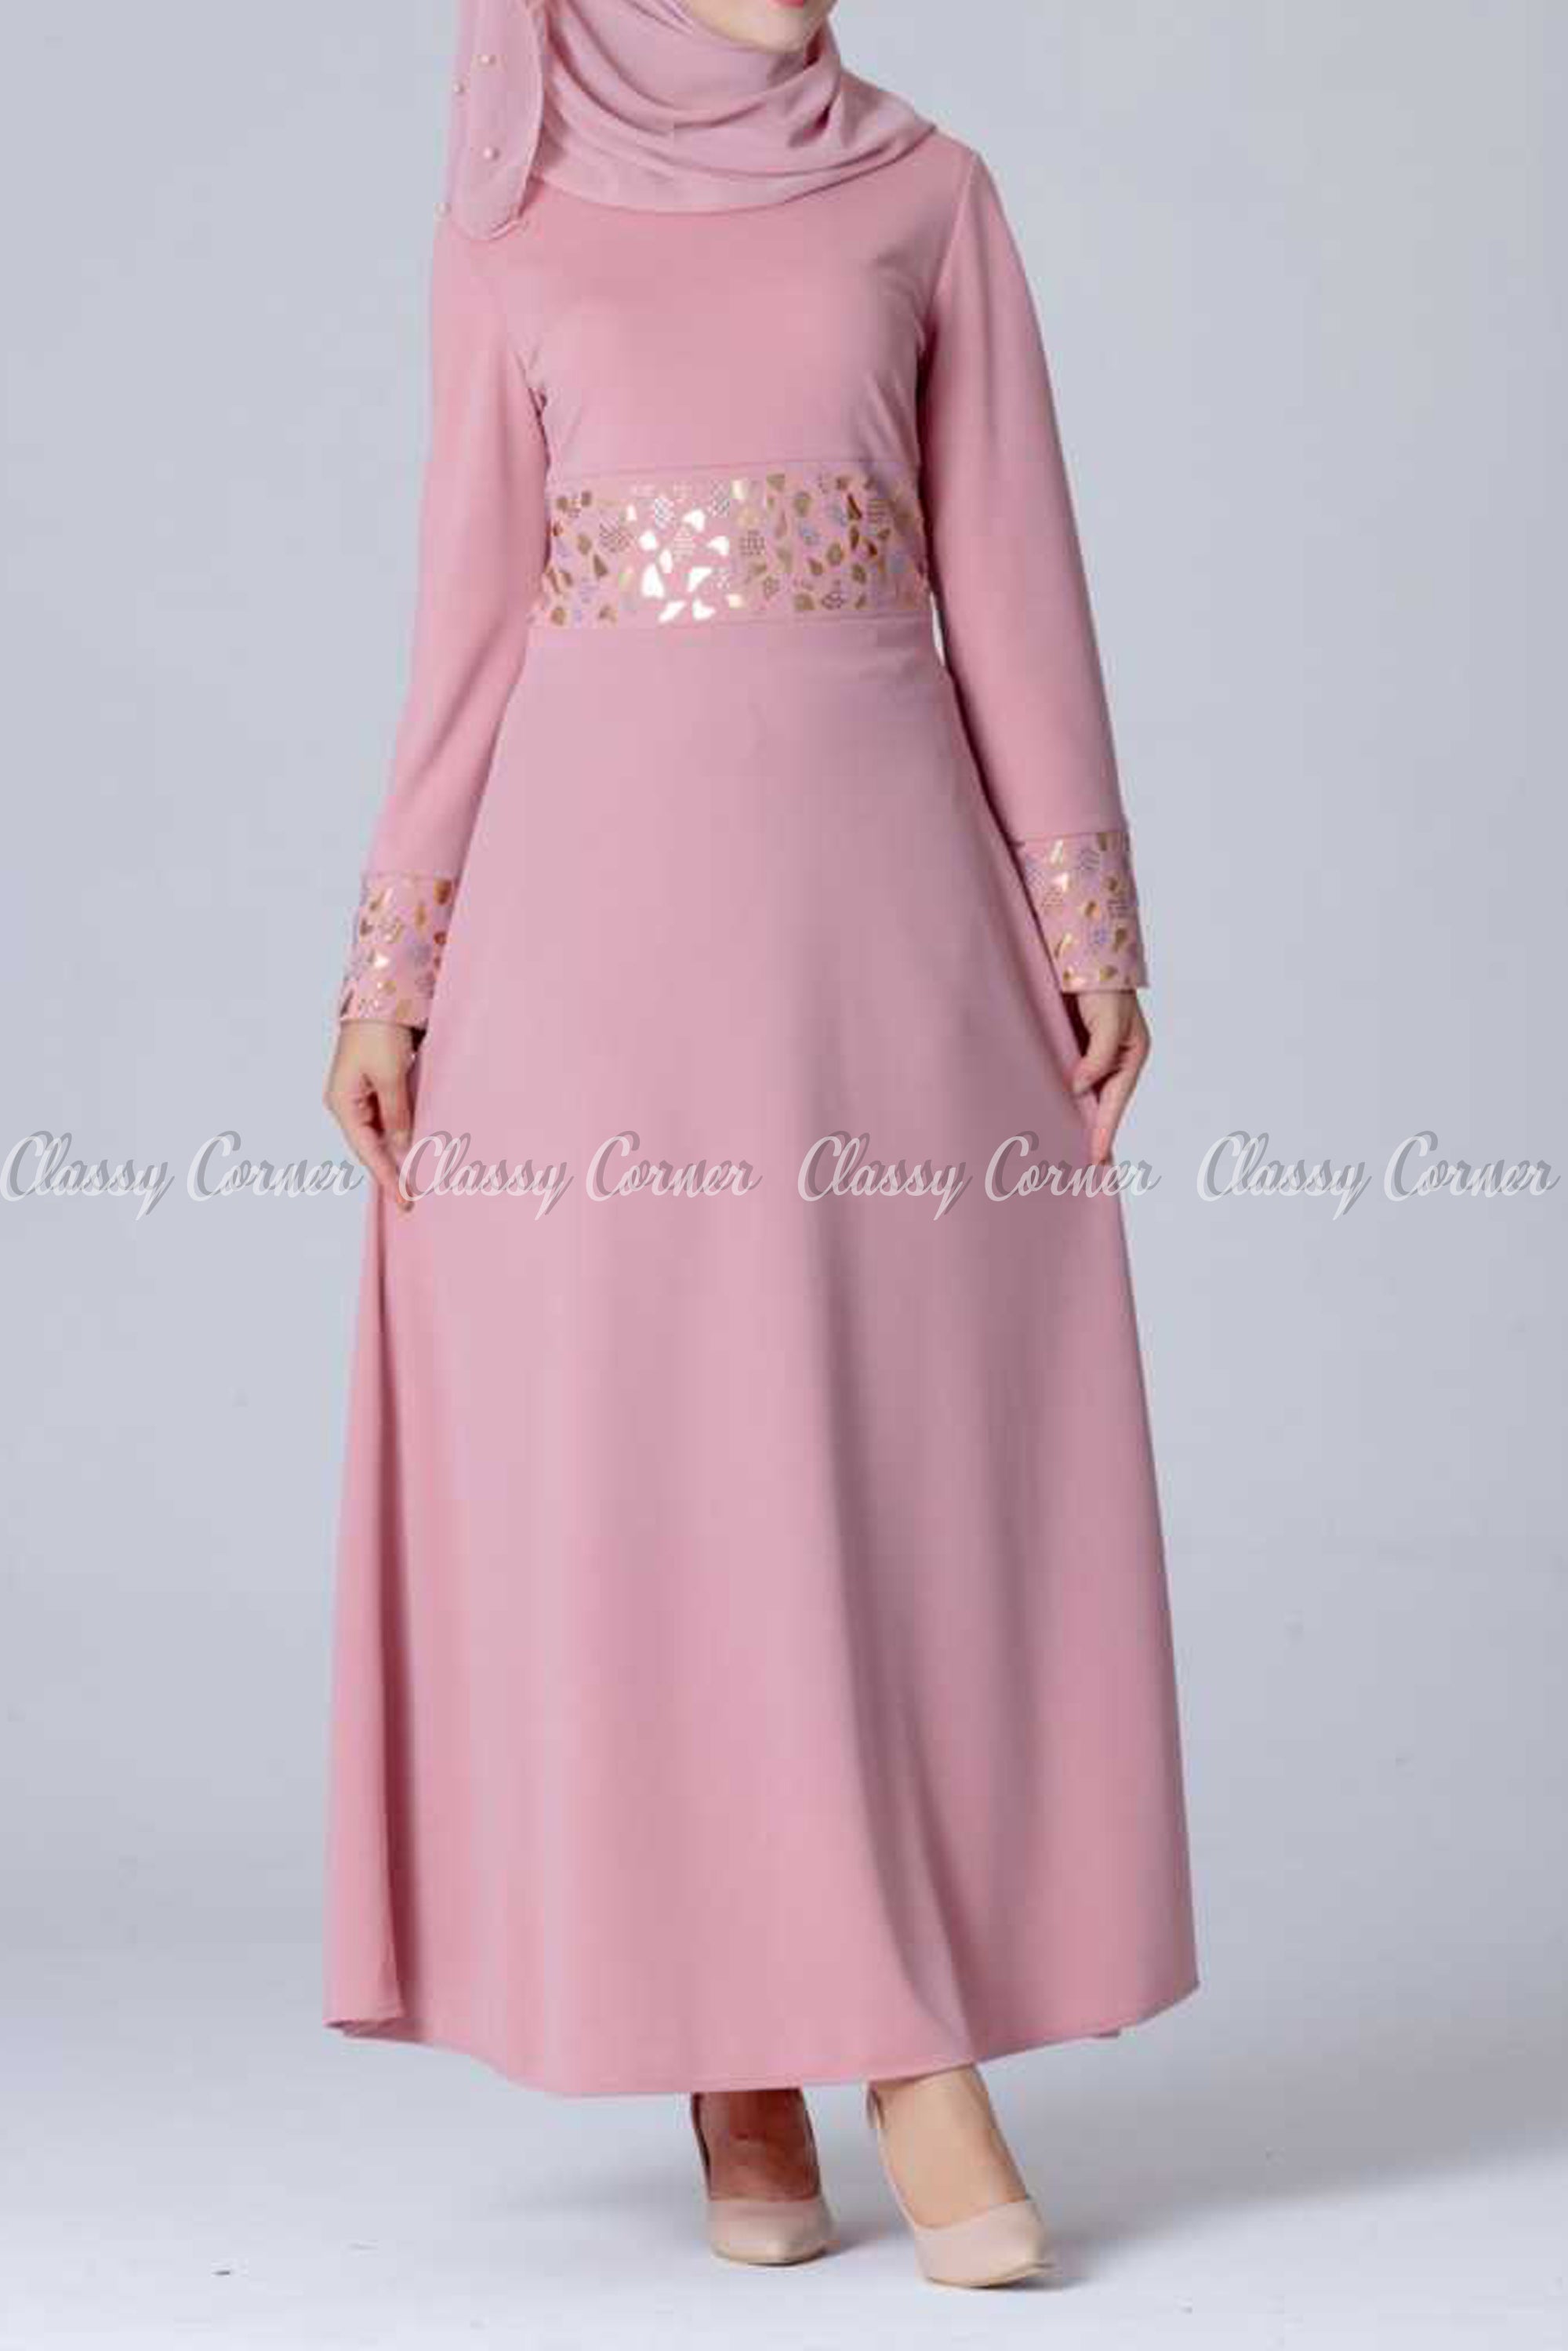 Gold and Silver Design Pink Modest Long Dress - full front view